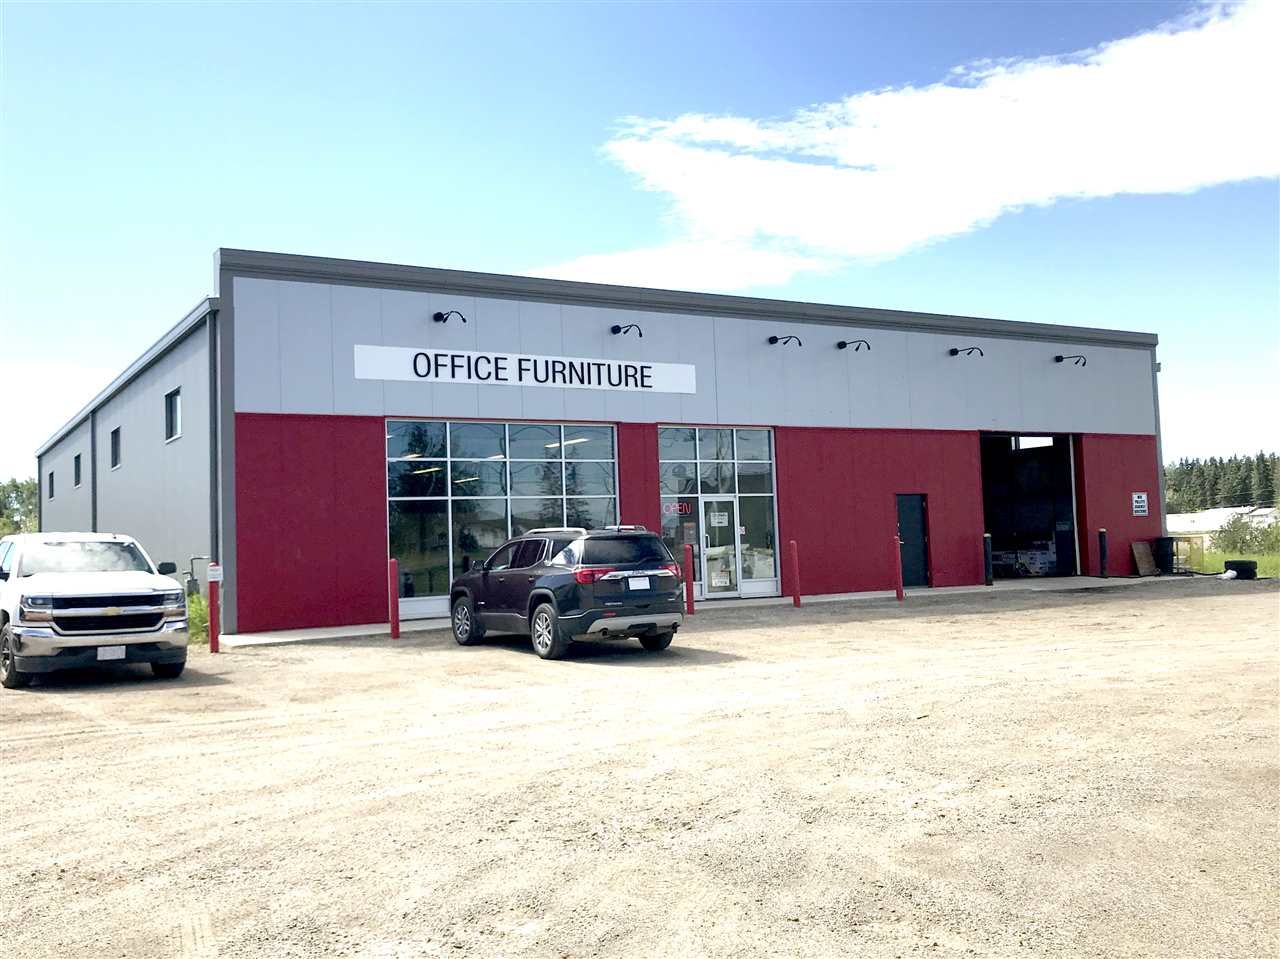 Main Photo: 6419 AIRPORT ROAD: Commercial for sale : MLS®# C8020413